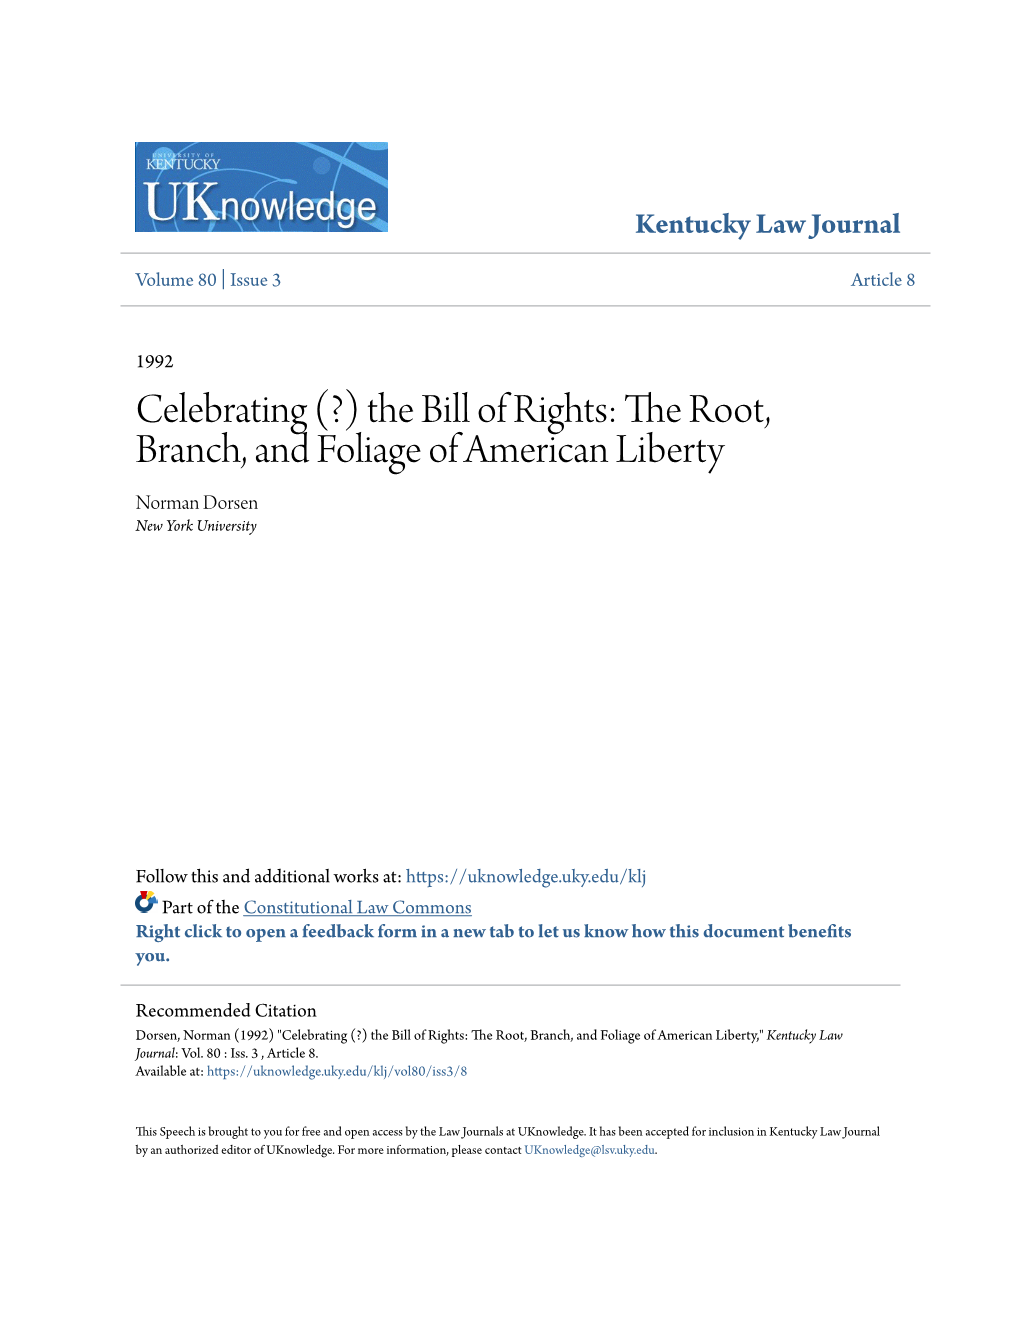 Celebrating (?) the Bill of Rights: the Root, Branch, and Foliage of American Liberty Norman Dorsen New York University